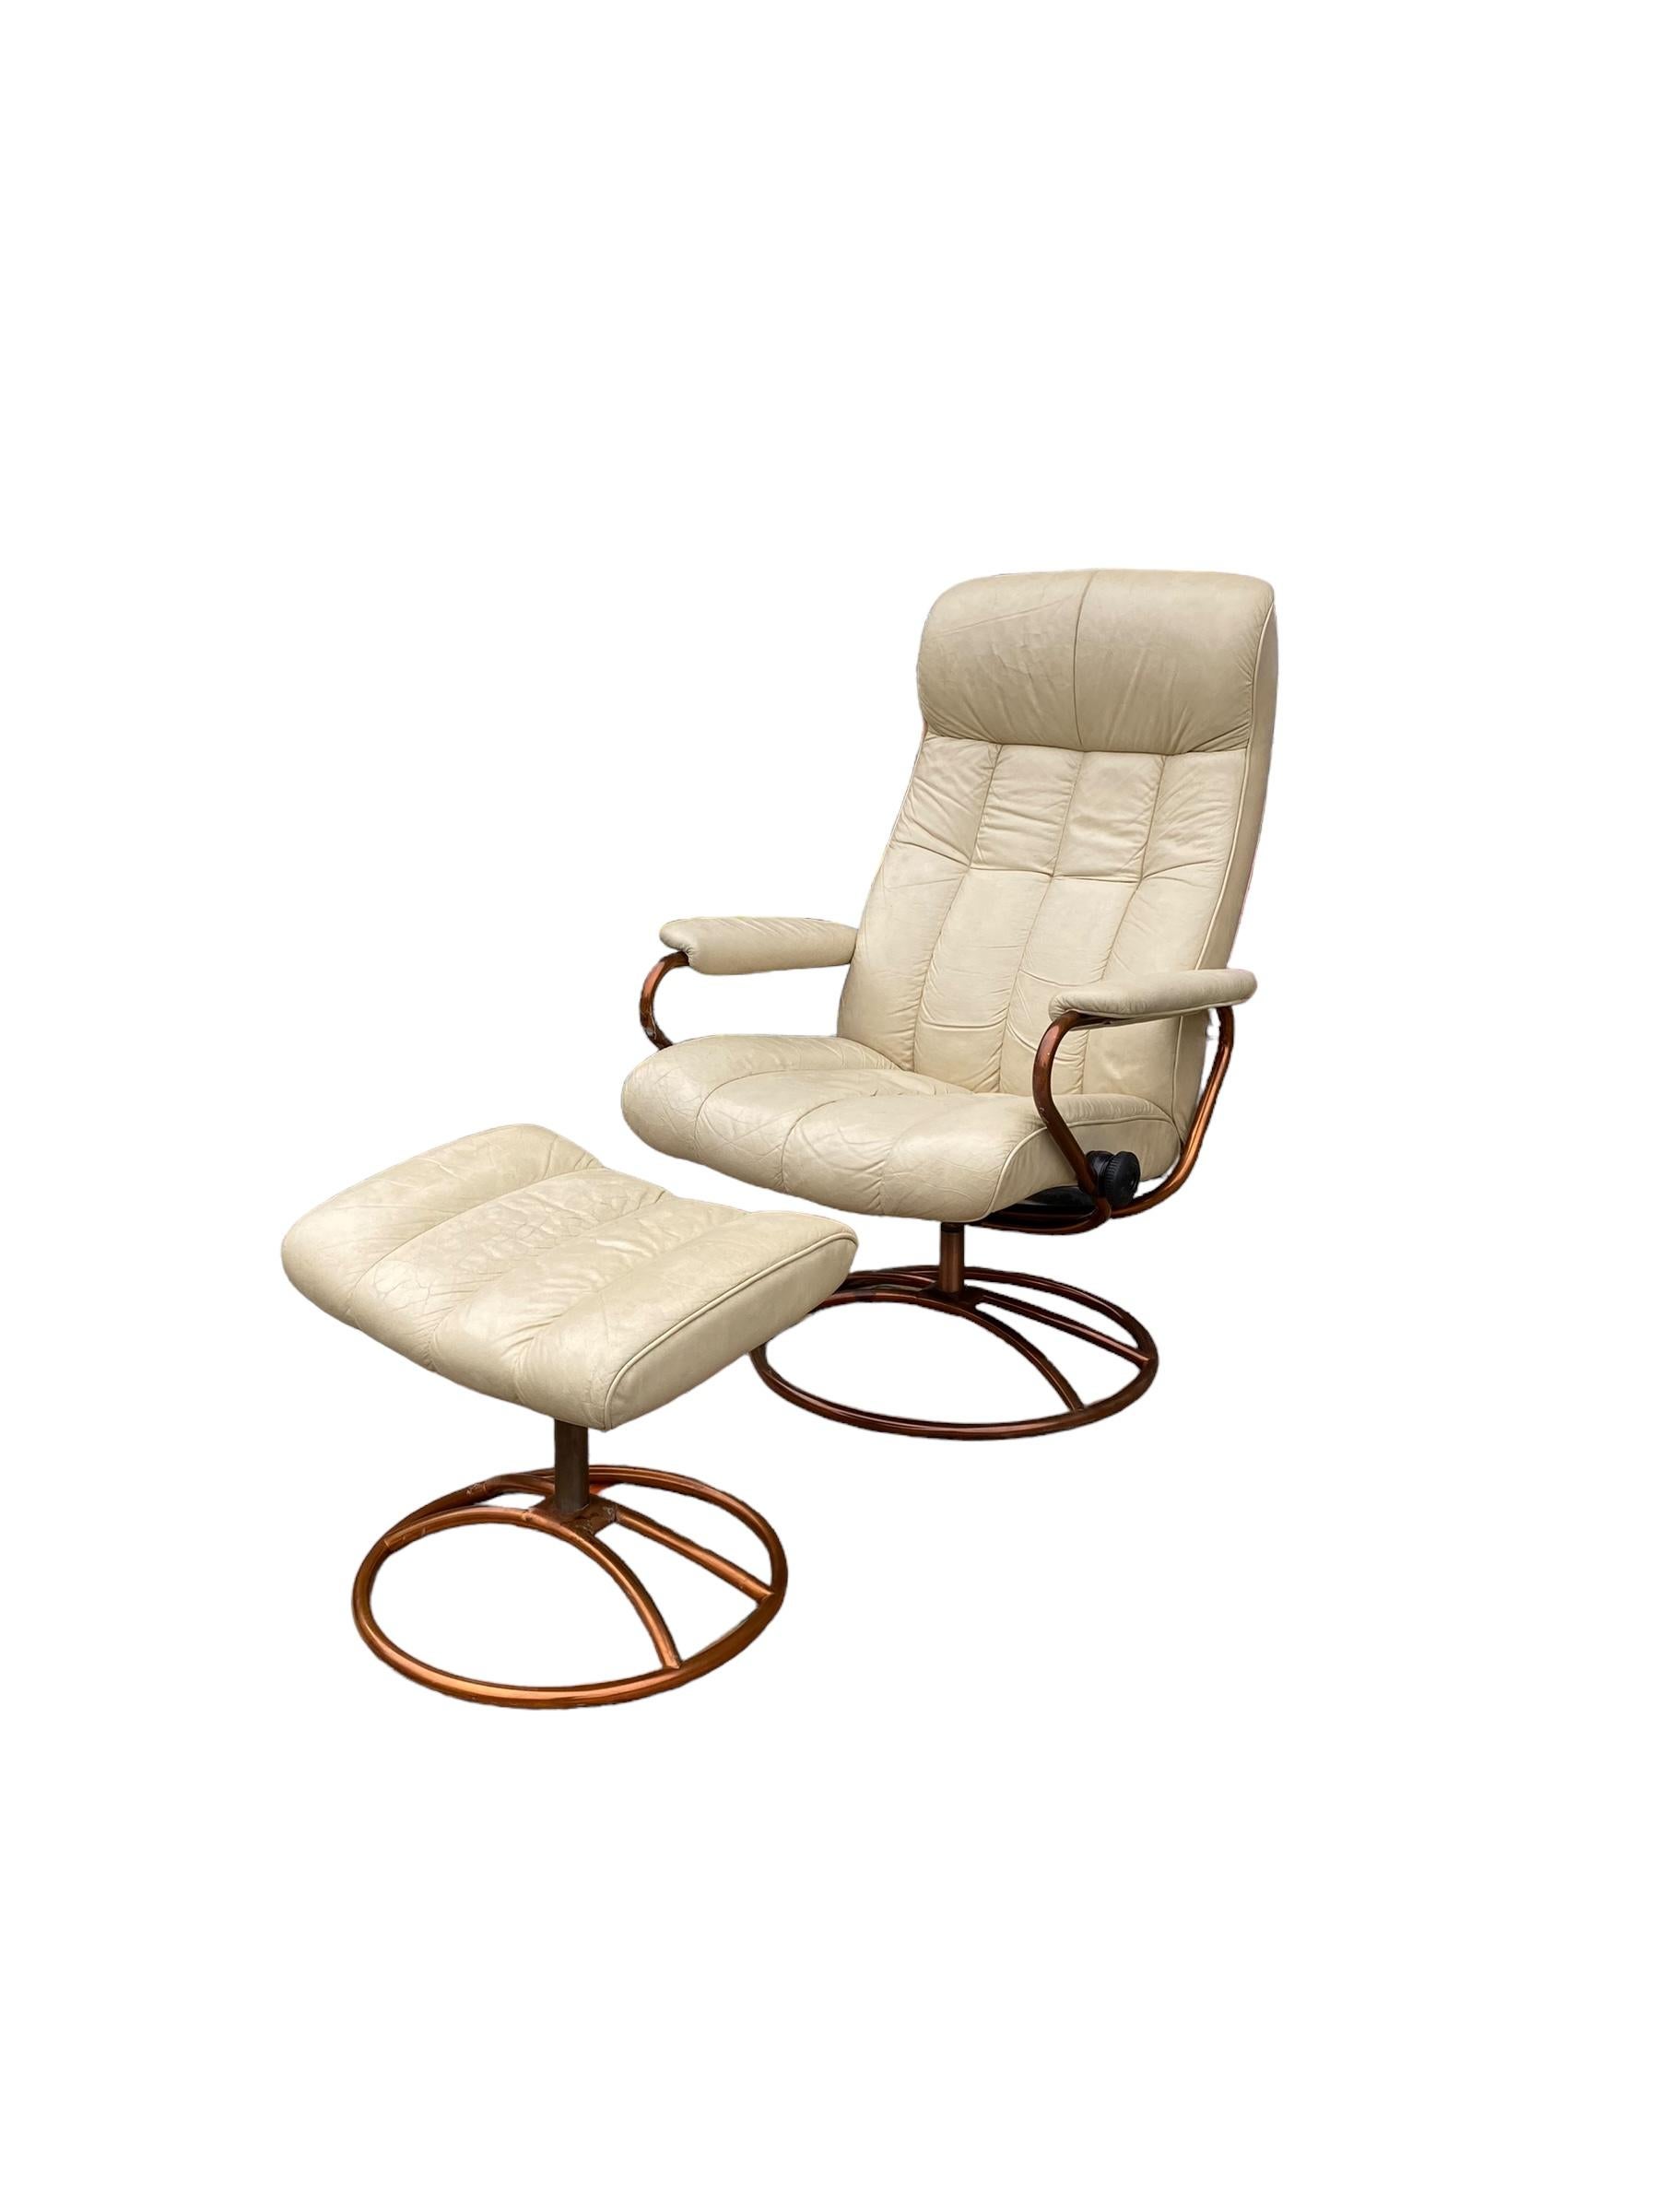 Copper Post Modern Stressless Lounge Chair and Ottoman with copper frame For Sale